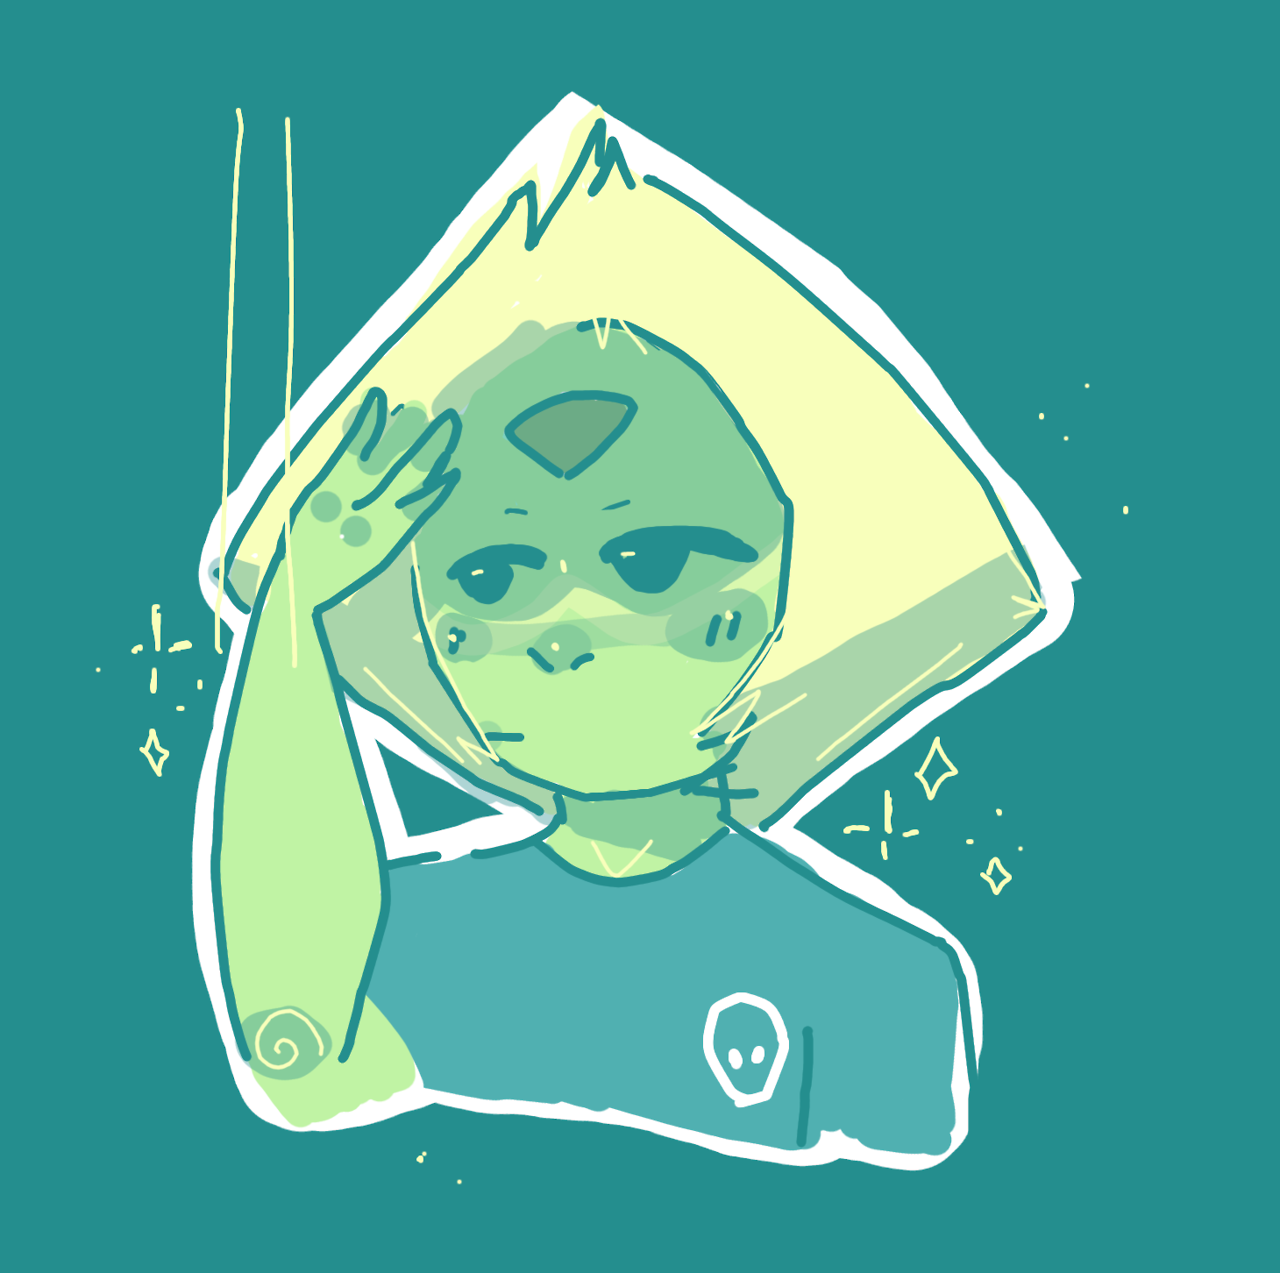 A doodle of peridot that accurately portrays my frustration of trying to relearn how to use a tablet